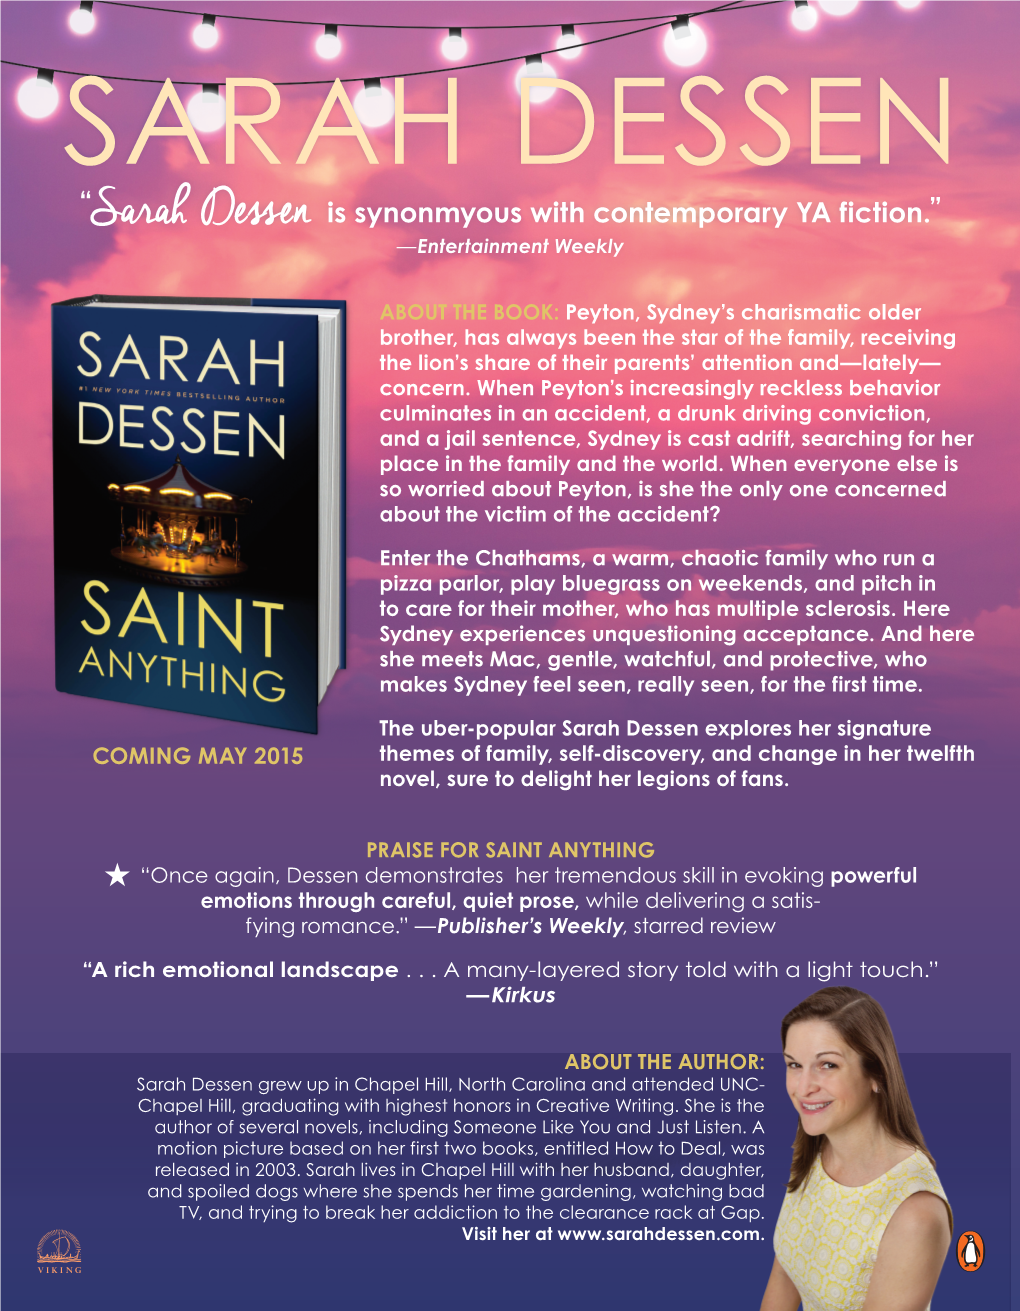 “Sarah Dessen Is Synonmyous with Contemporary YA Fiction.” —Entertainment Weekly